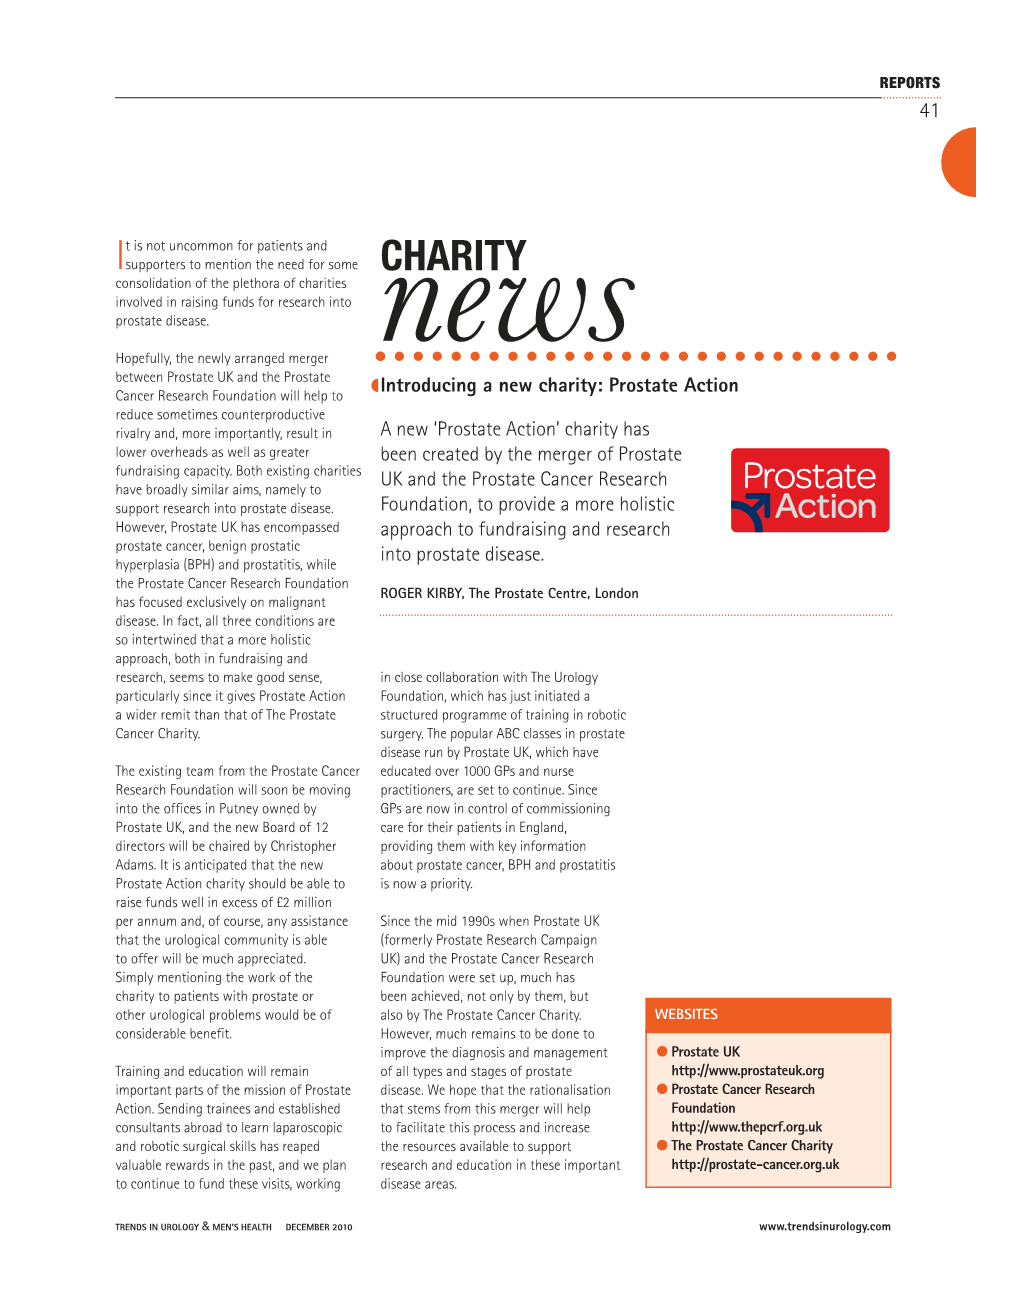 CHARITY Consolidation of the Plethora of Charities Involved in Raising Funds for Research Into Prostate Disease